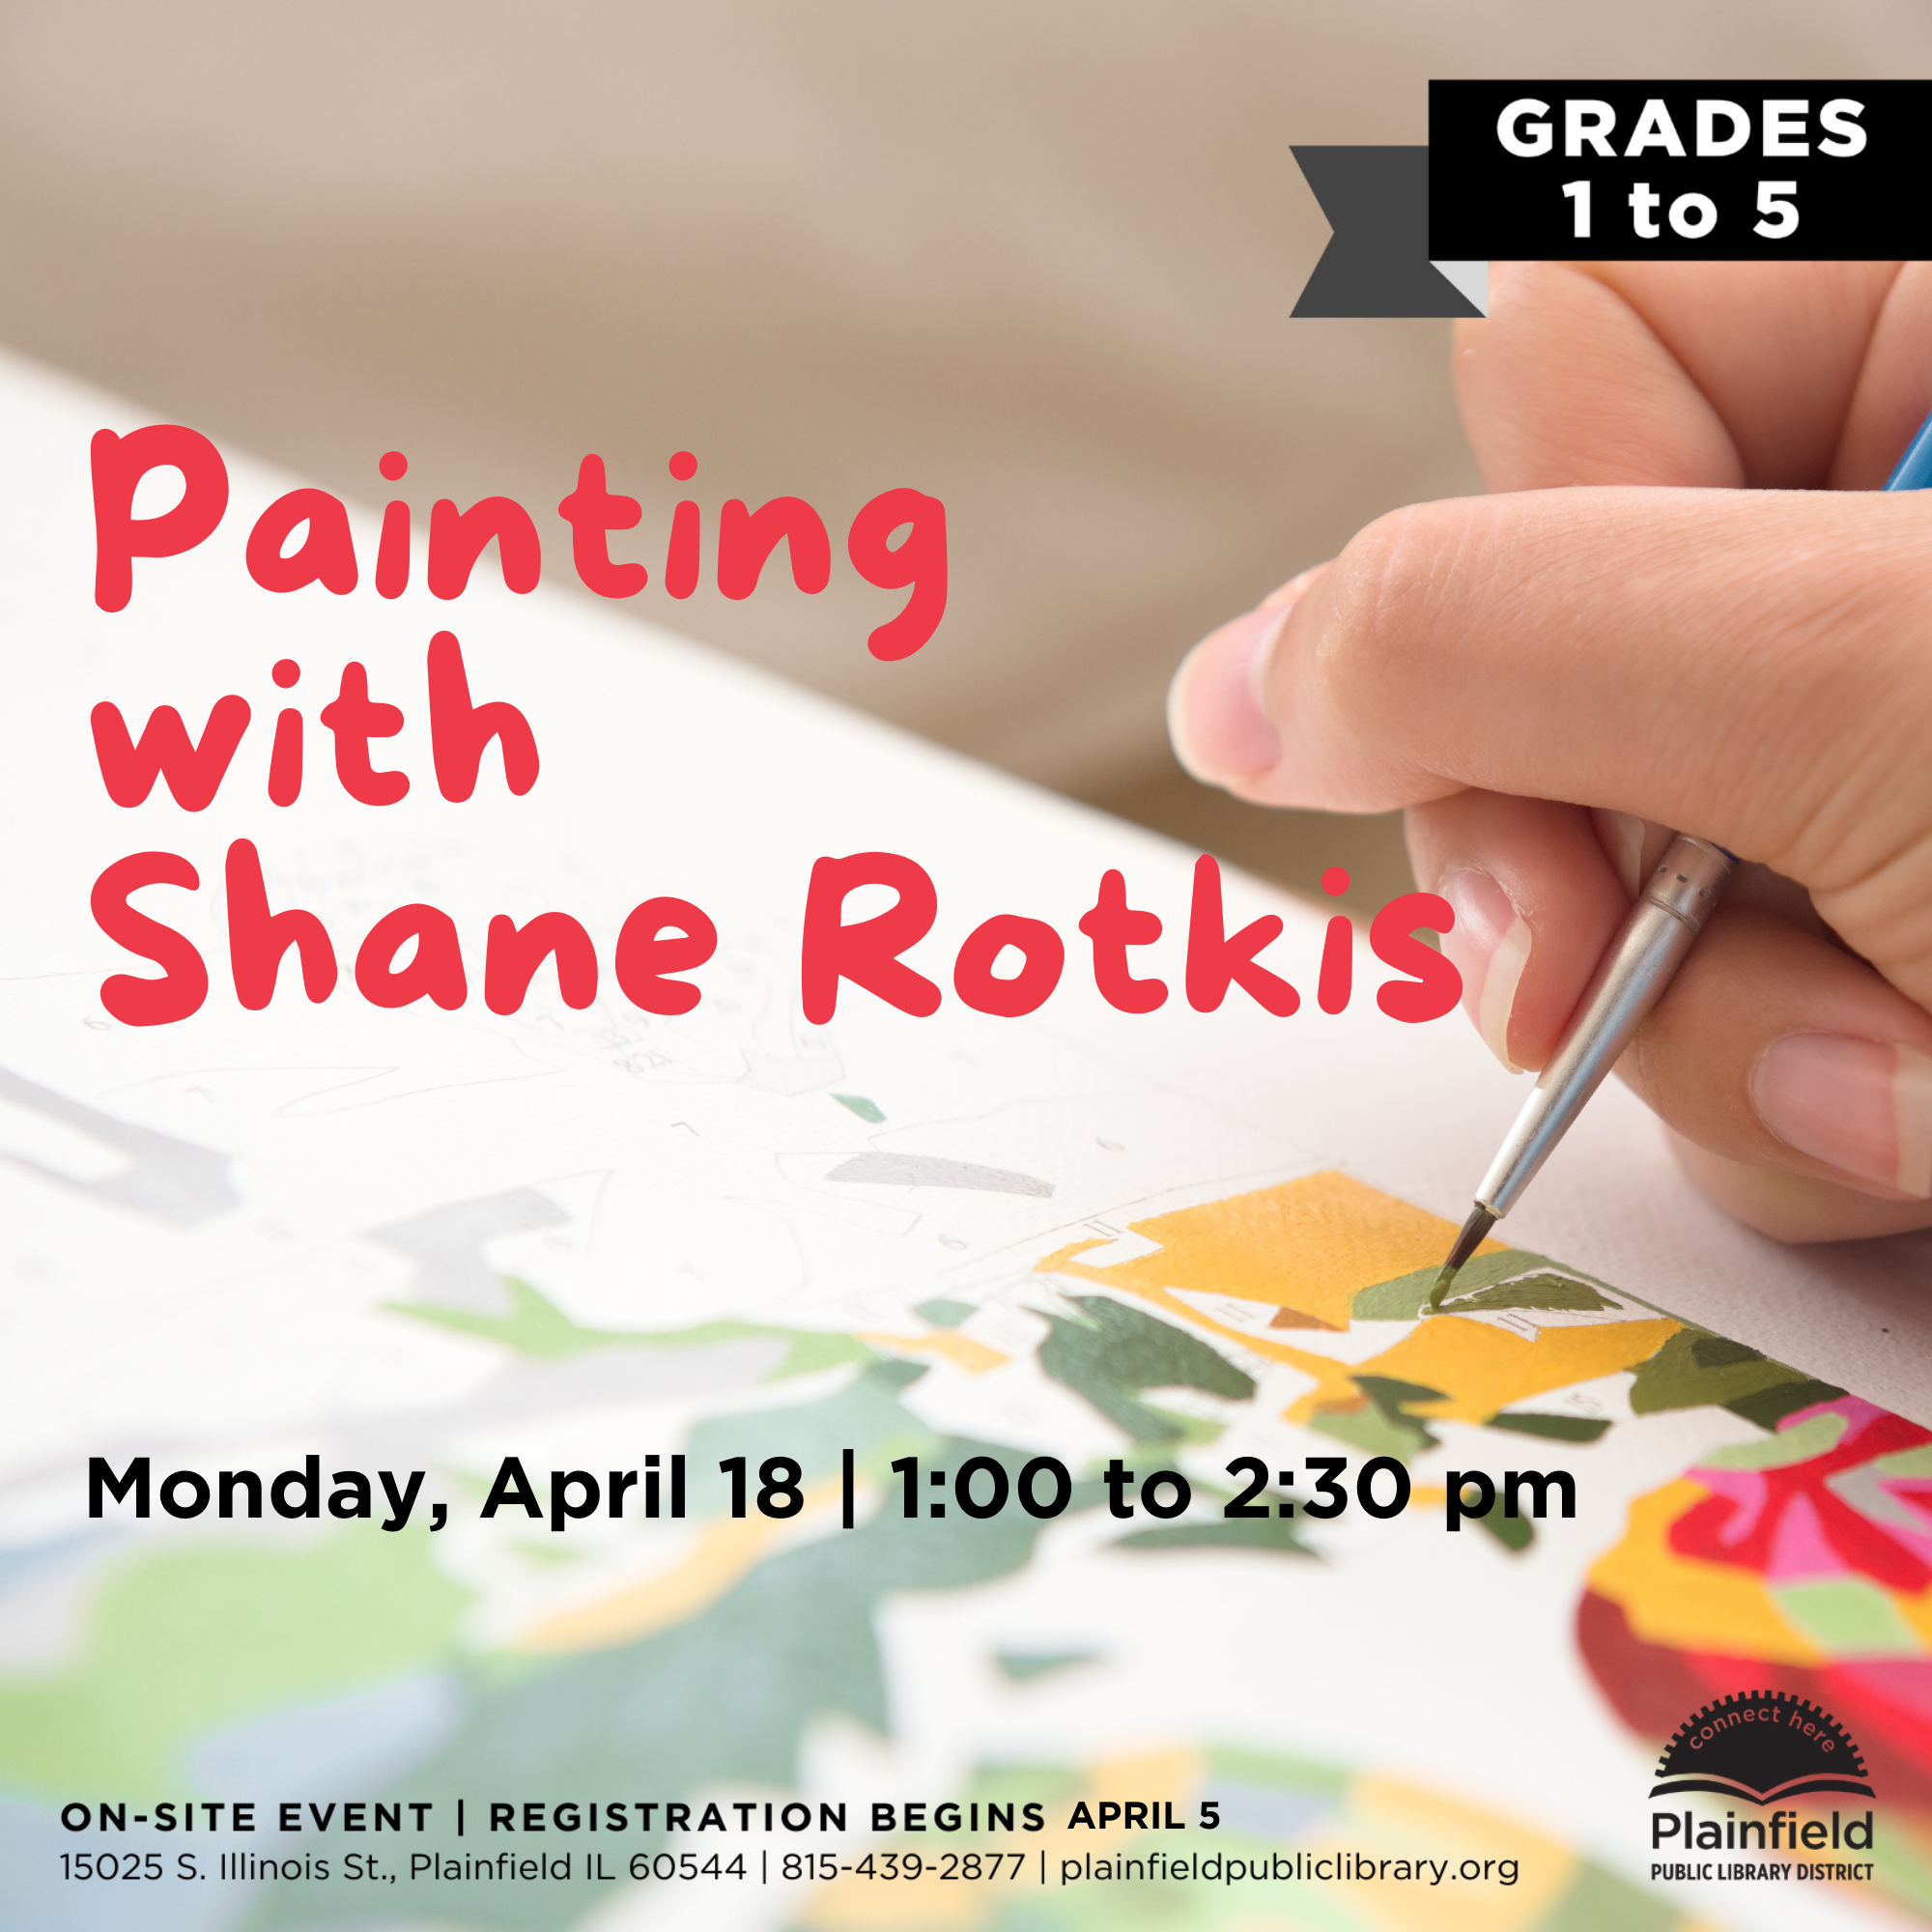 Painting with Shane Rotkis